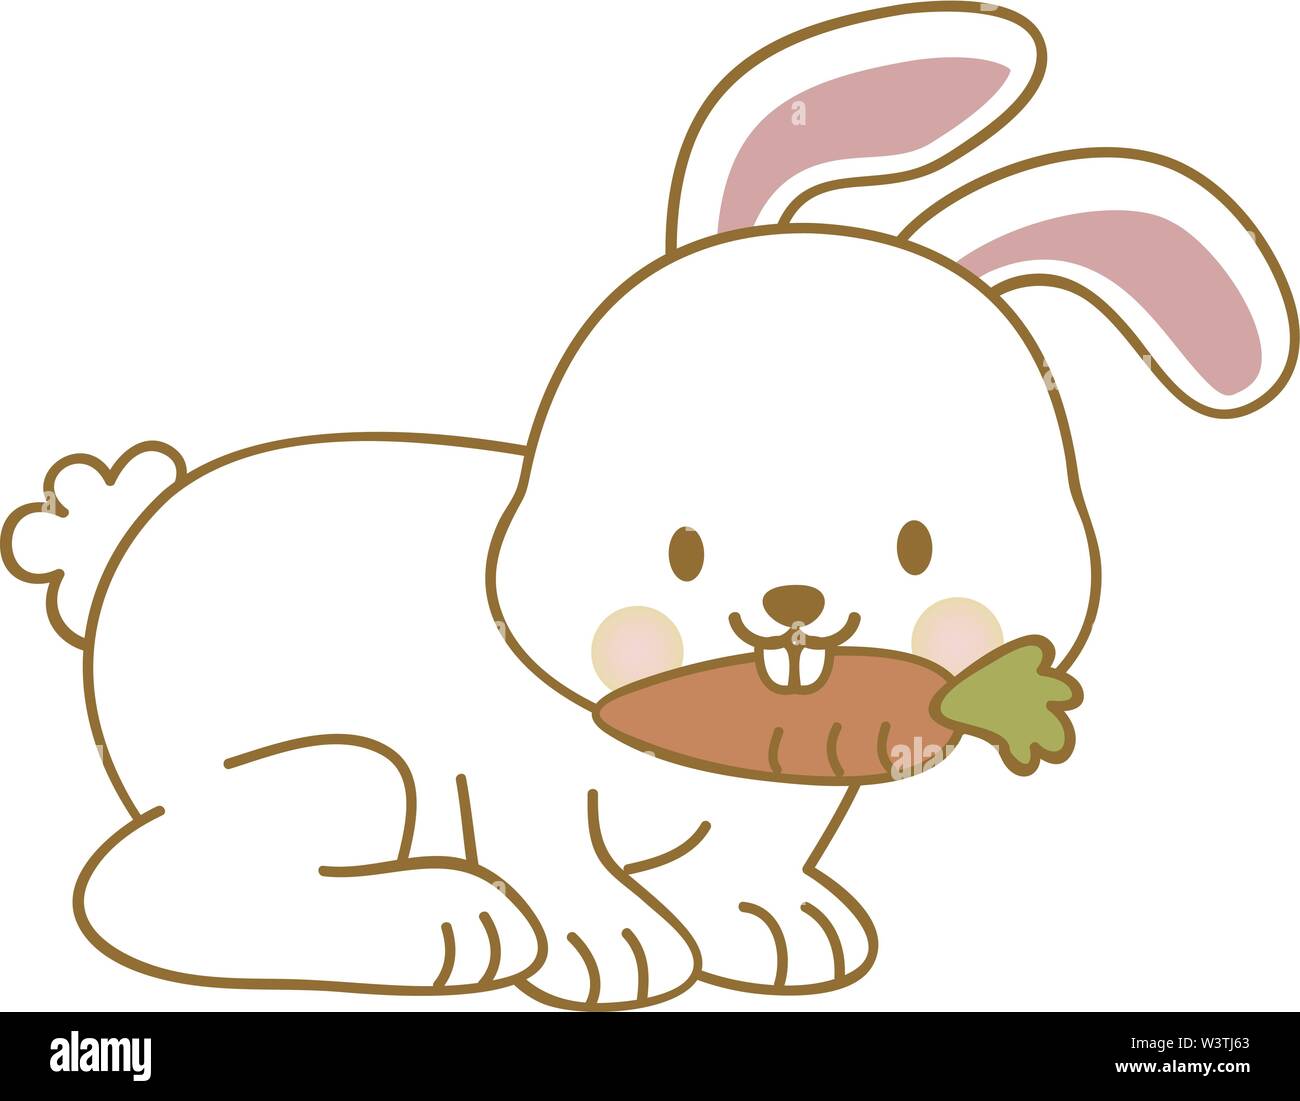 Bunny eating a carrot, illustration, vector on white background. Stock Vector